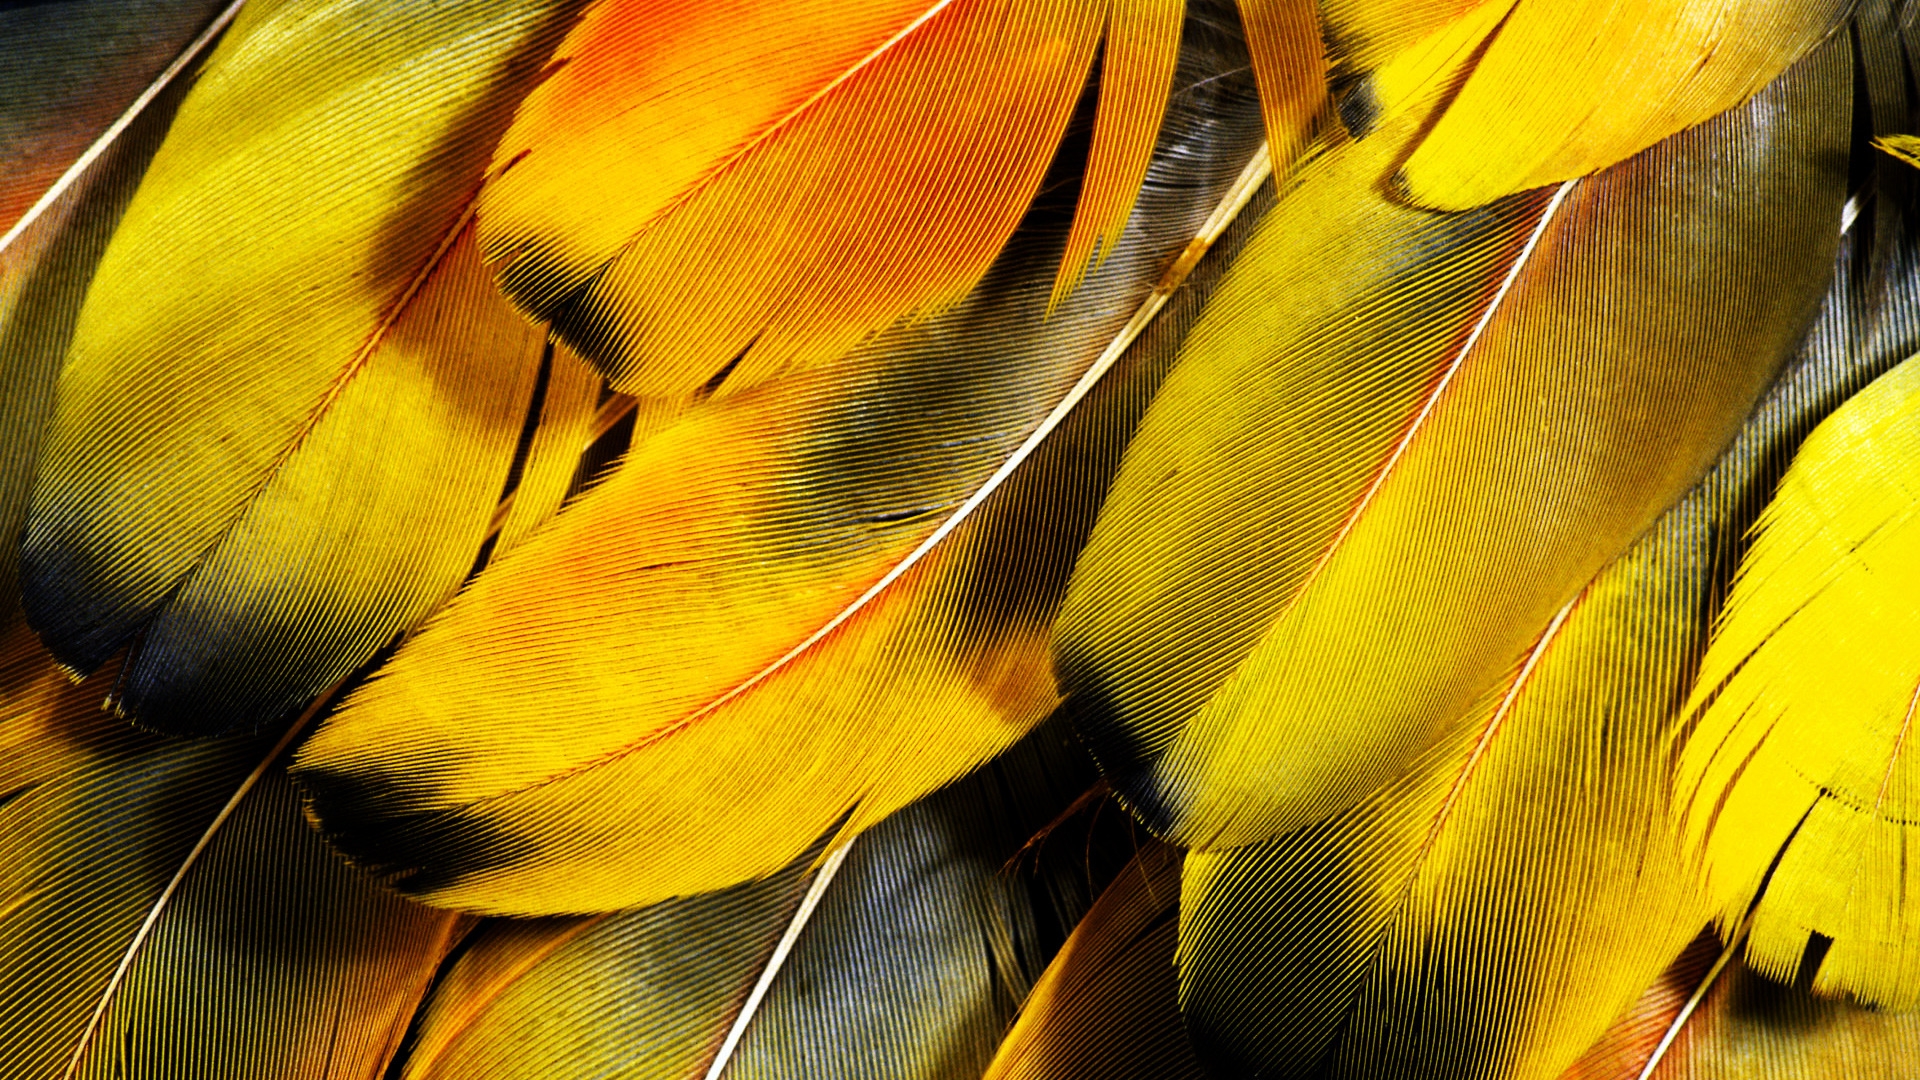 Feathers for 1920 x 1080 HDTV 1080p resolution